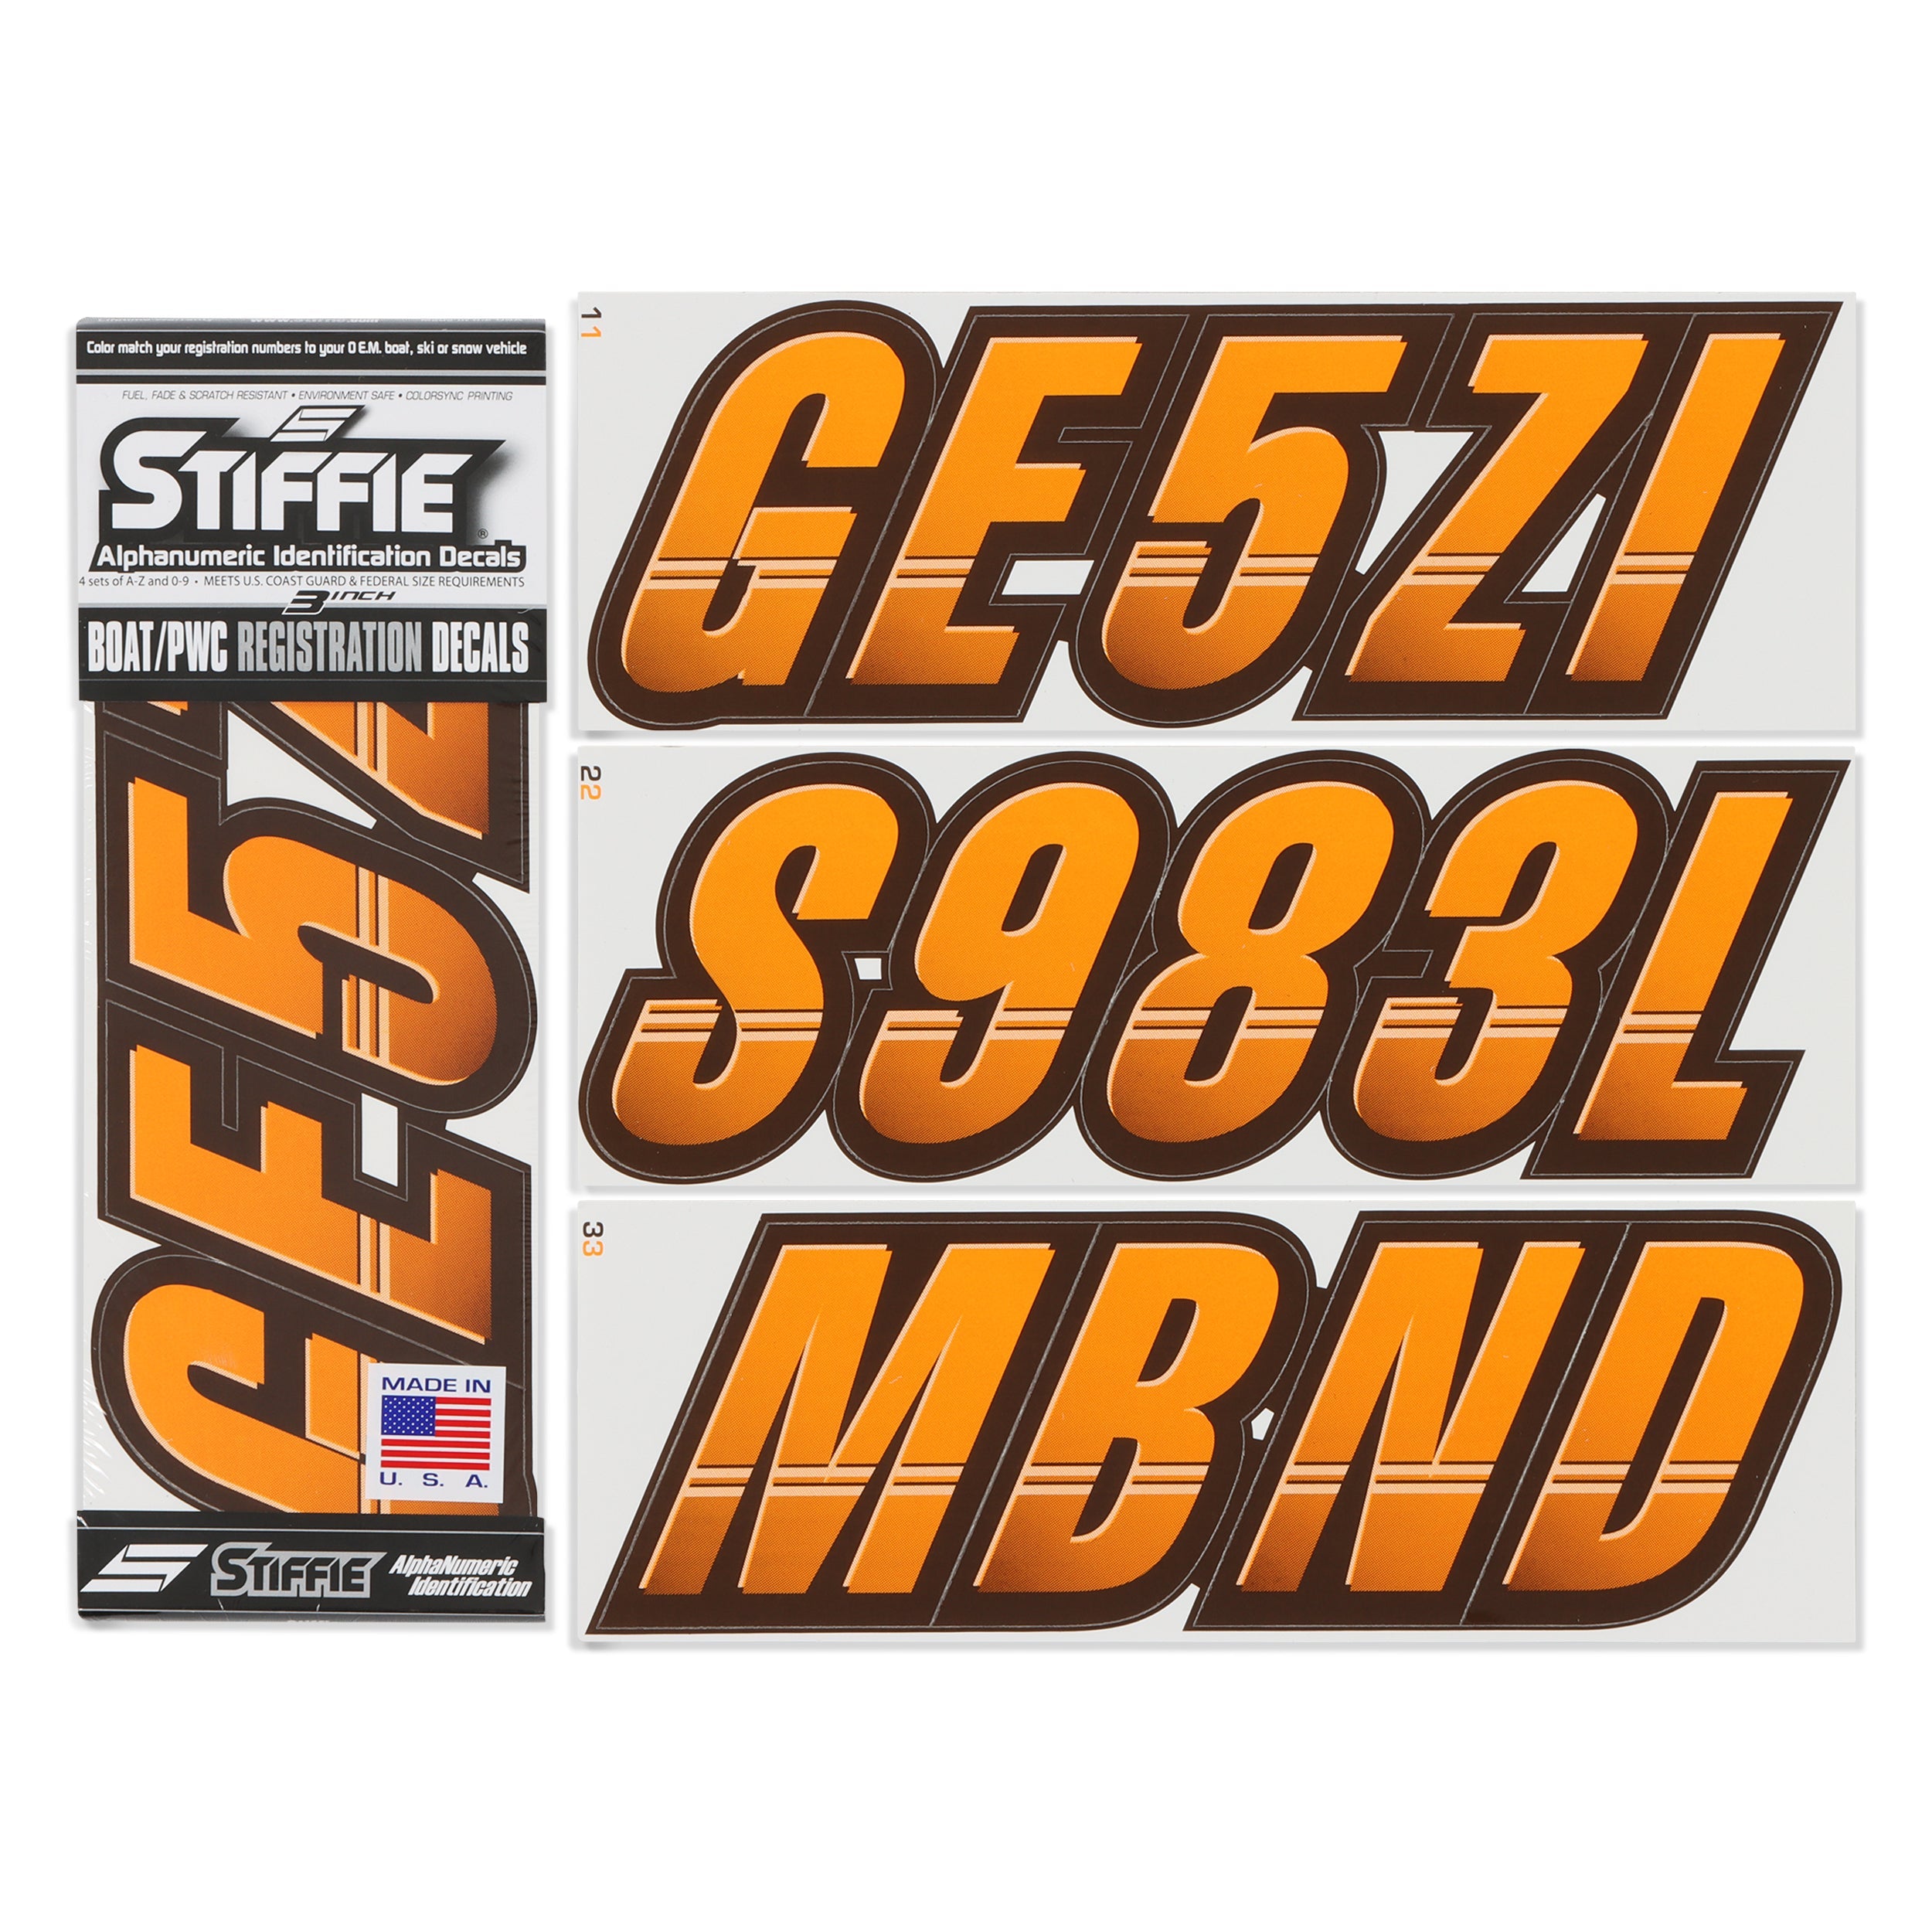 Stiffie Techtron Gold Rush / Black 3" Alpha-Numeric Registration Identification Numbers Stickers Decals for Boats & Personal Watercraft